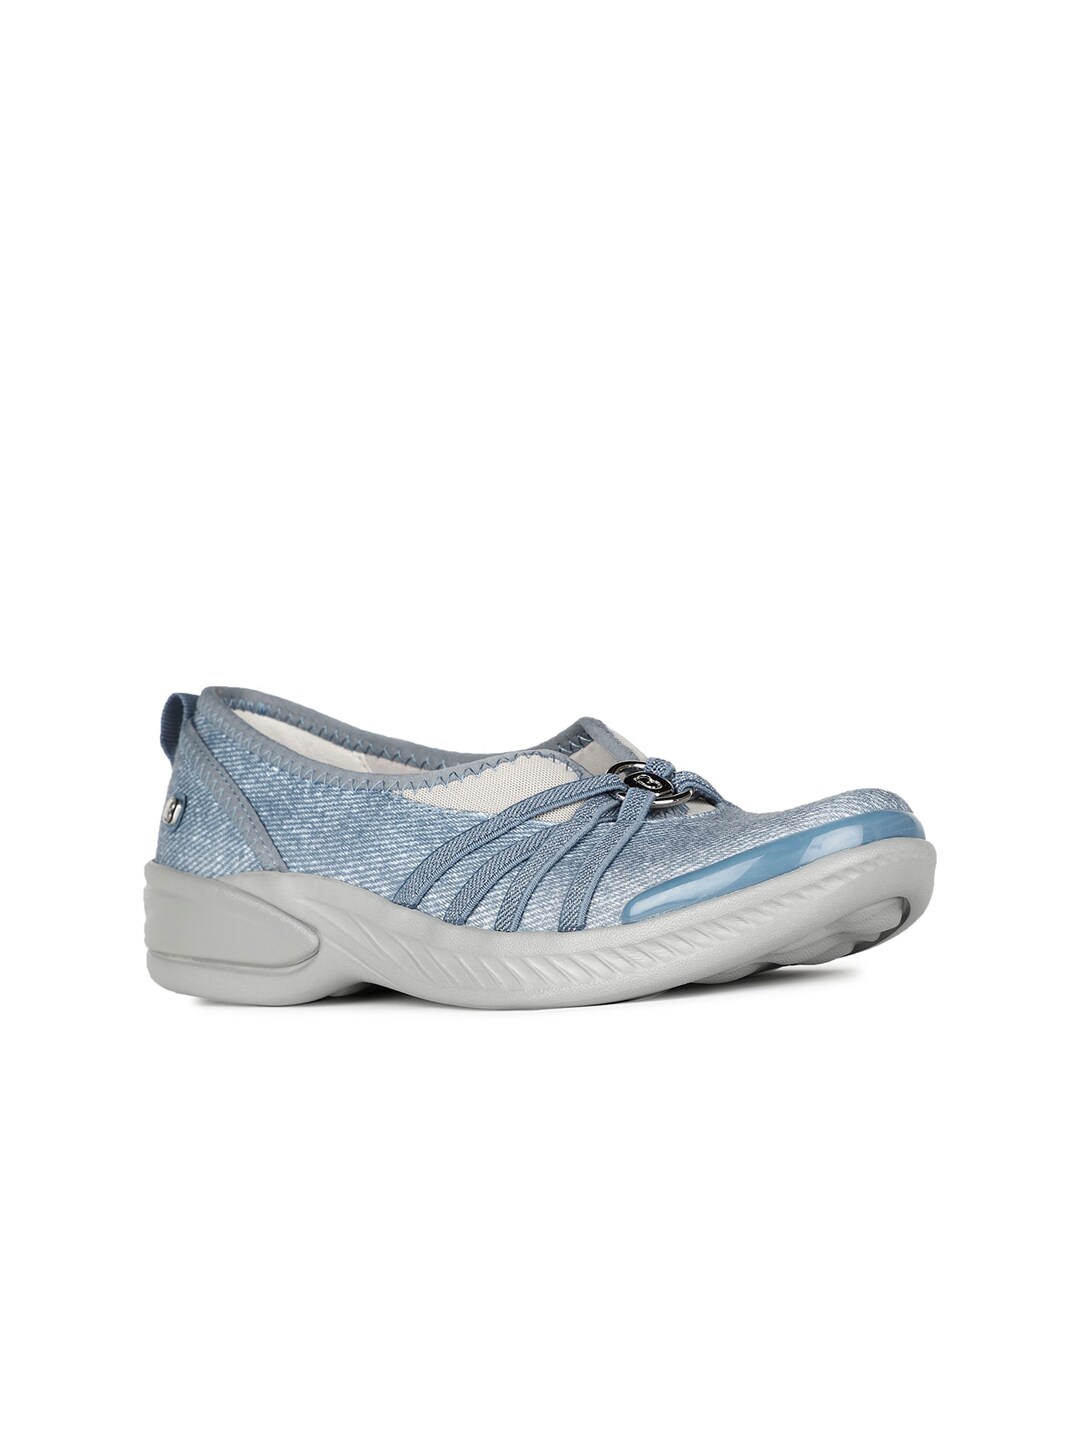 Naturalizer Women Embellished Slip-On Sneakers Price in India